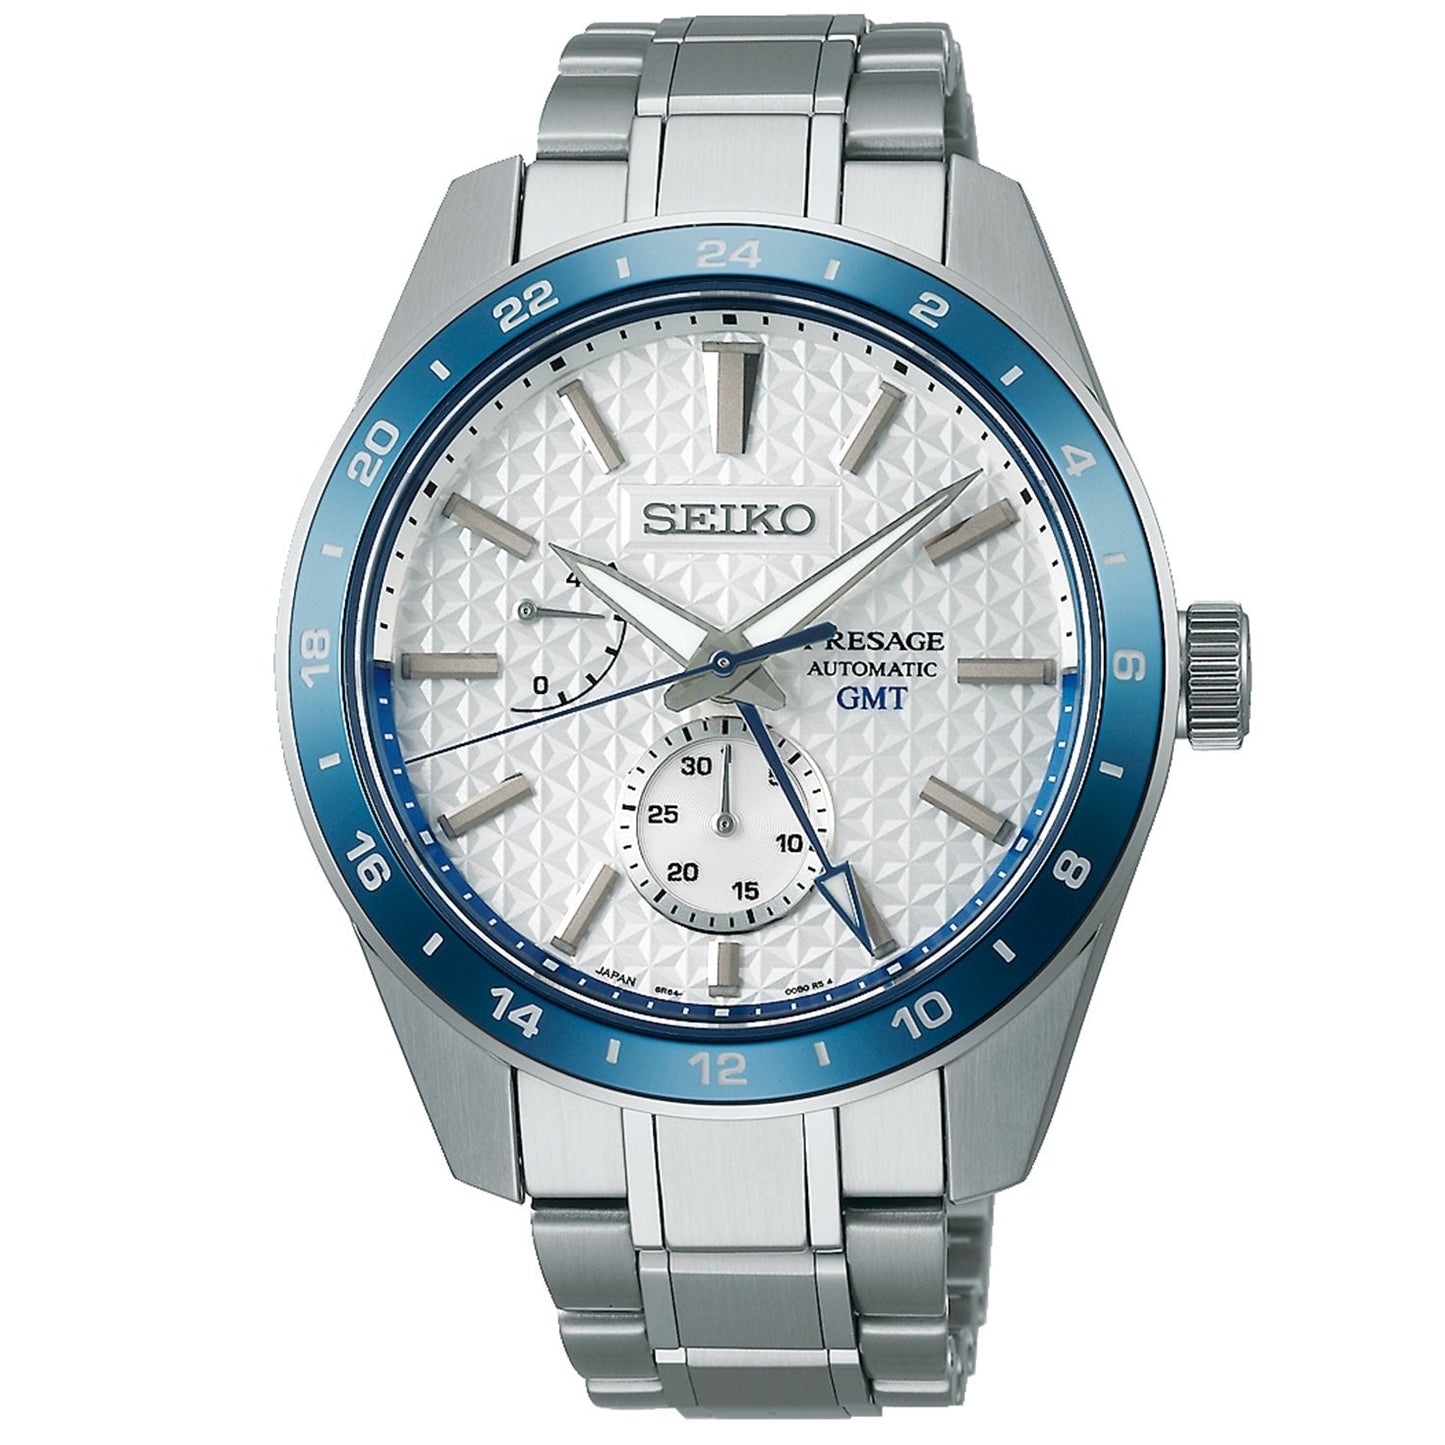 Seiko Presage Prestige Line 140th Anniversary Limited Edition Automatic With Manual Winding 42.2mm Watch